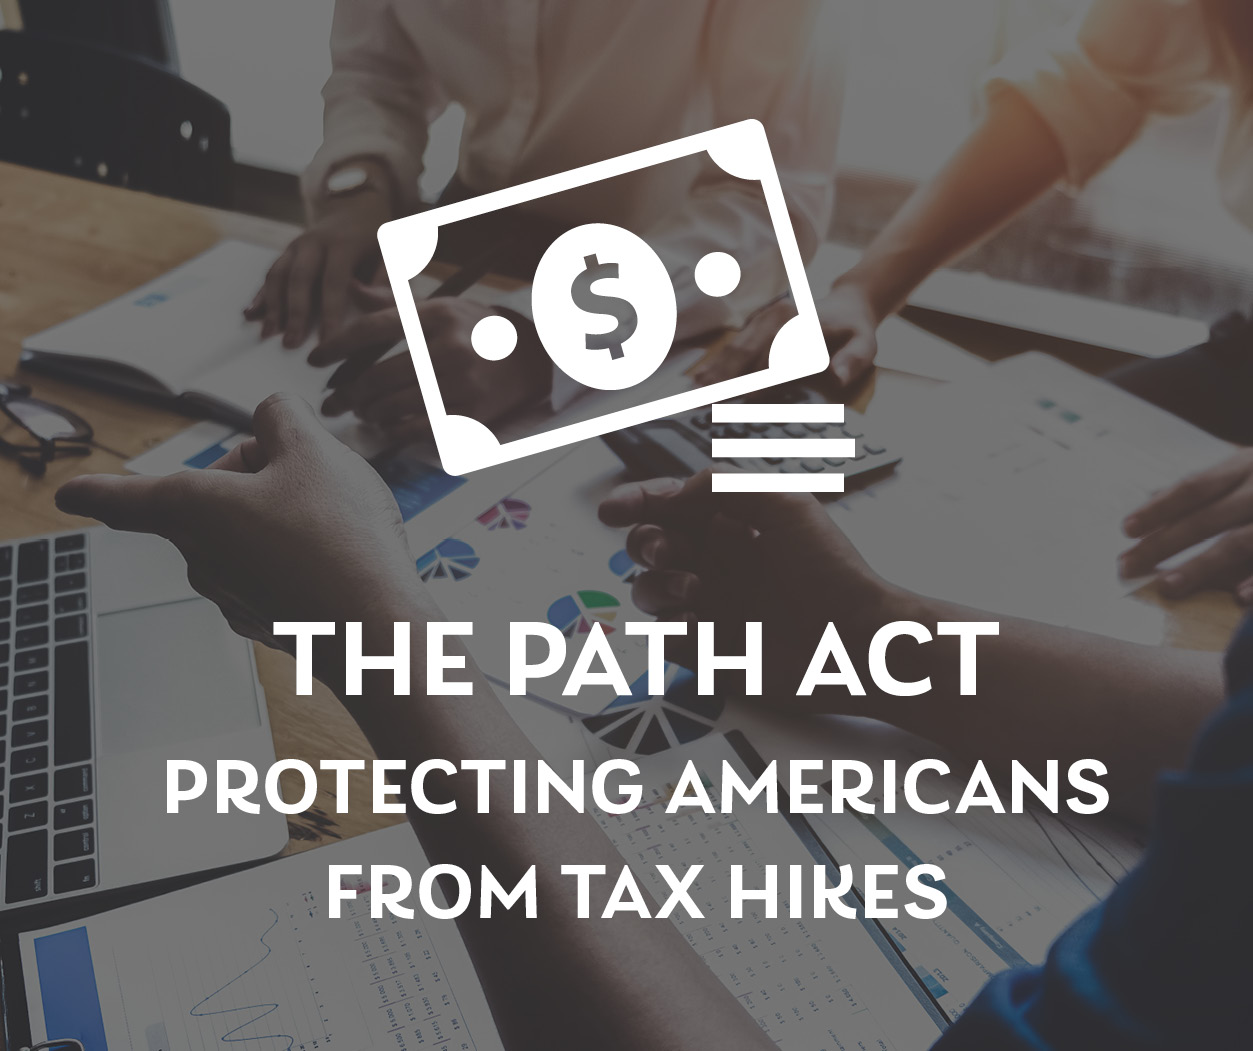 The PATH Act explained by GSACPA Scarborough Associates